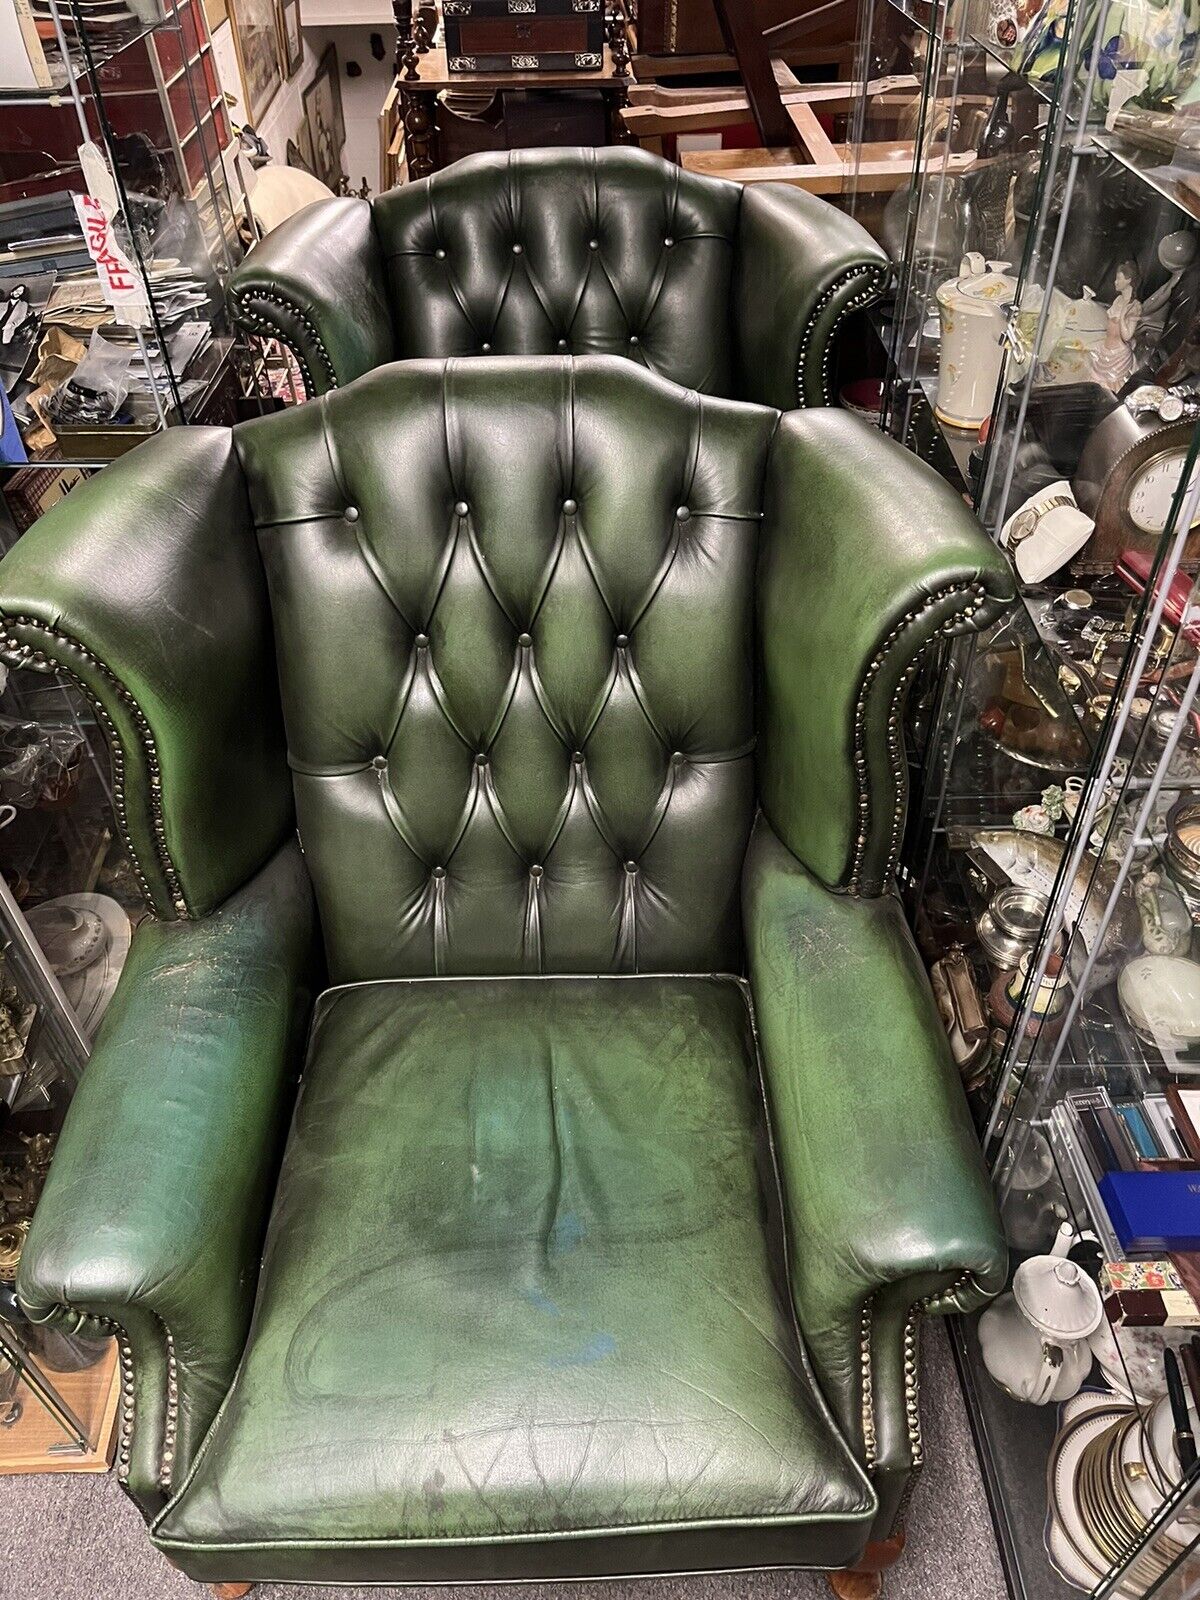 Pair Of Green Leather Armchairs. Good Quality, Buttoned Back, Impressive